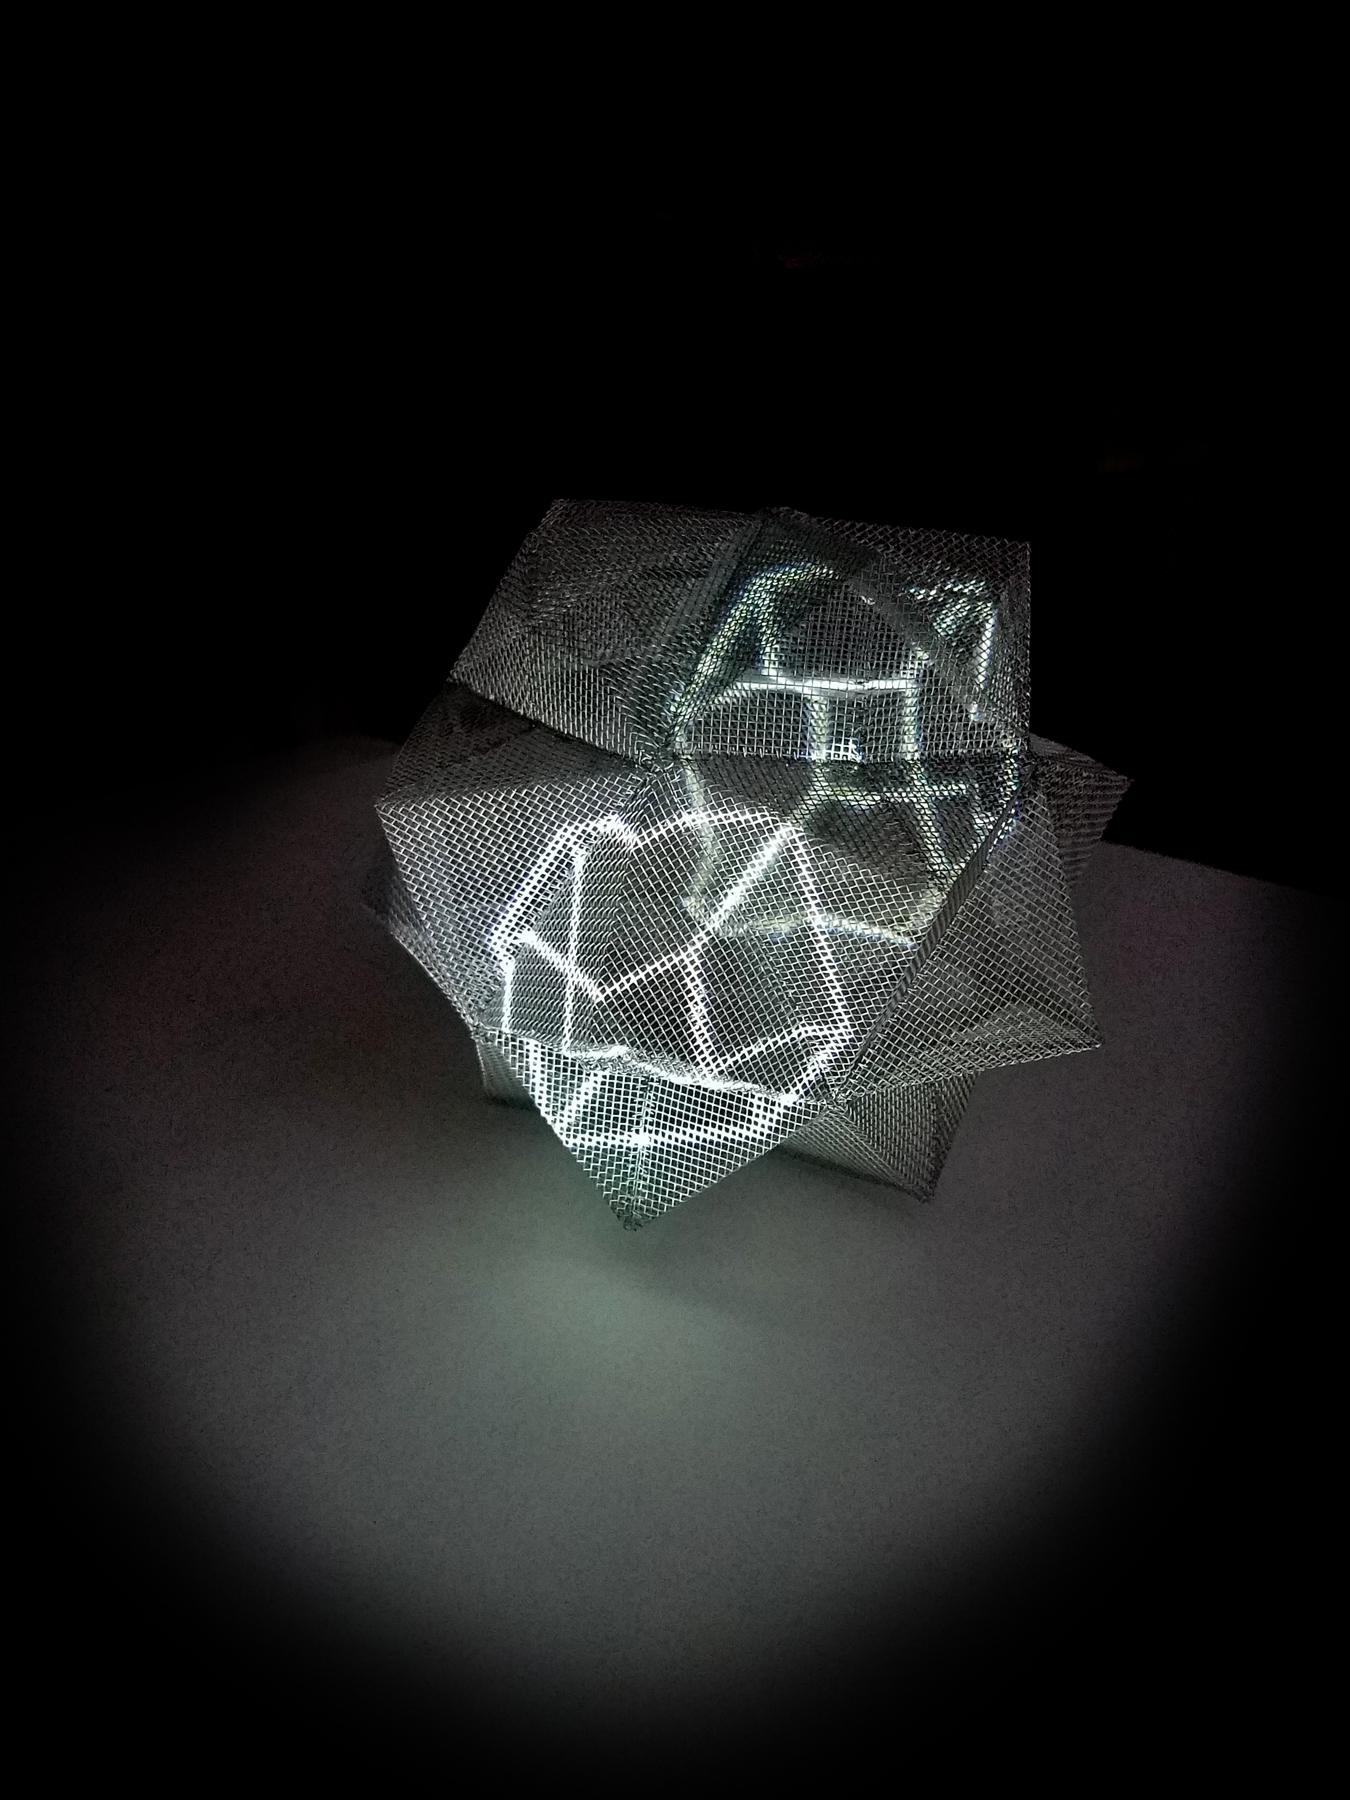 Image for entry 'Necker Cube and Stellated Icosahedron'